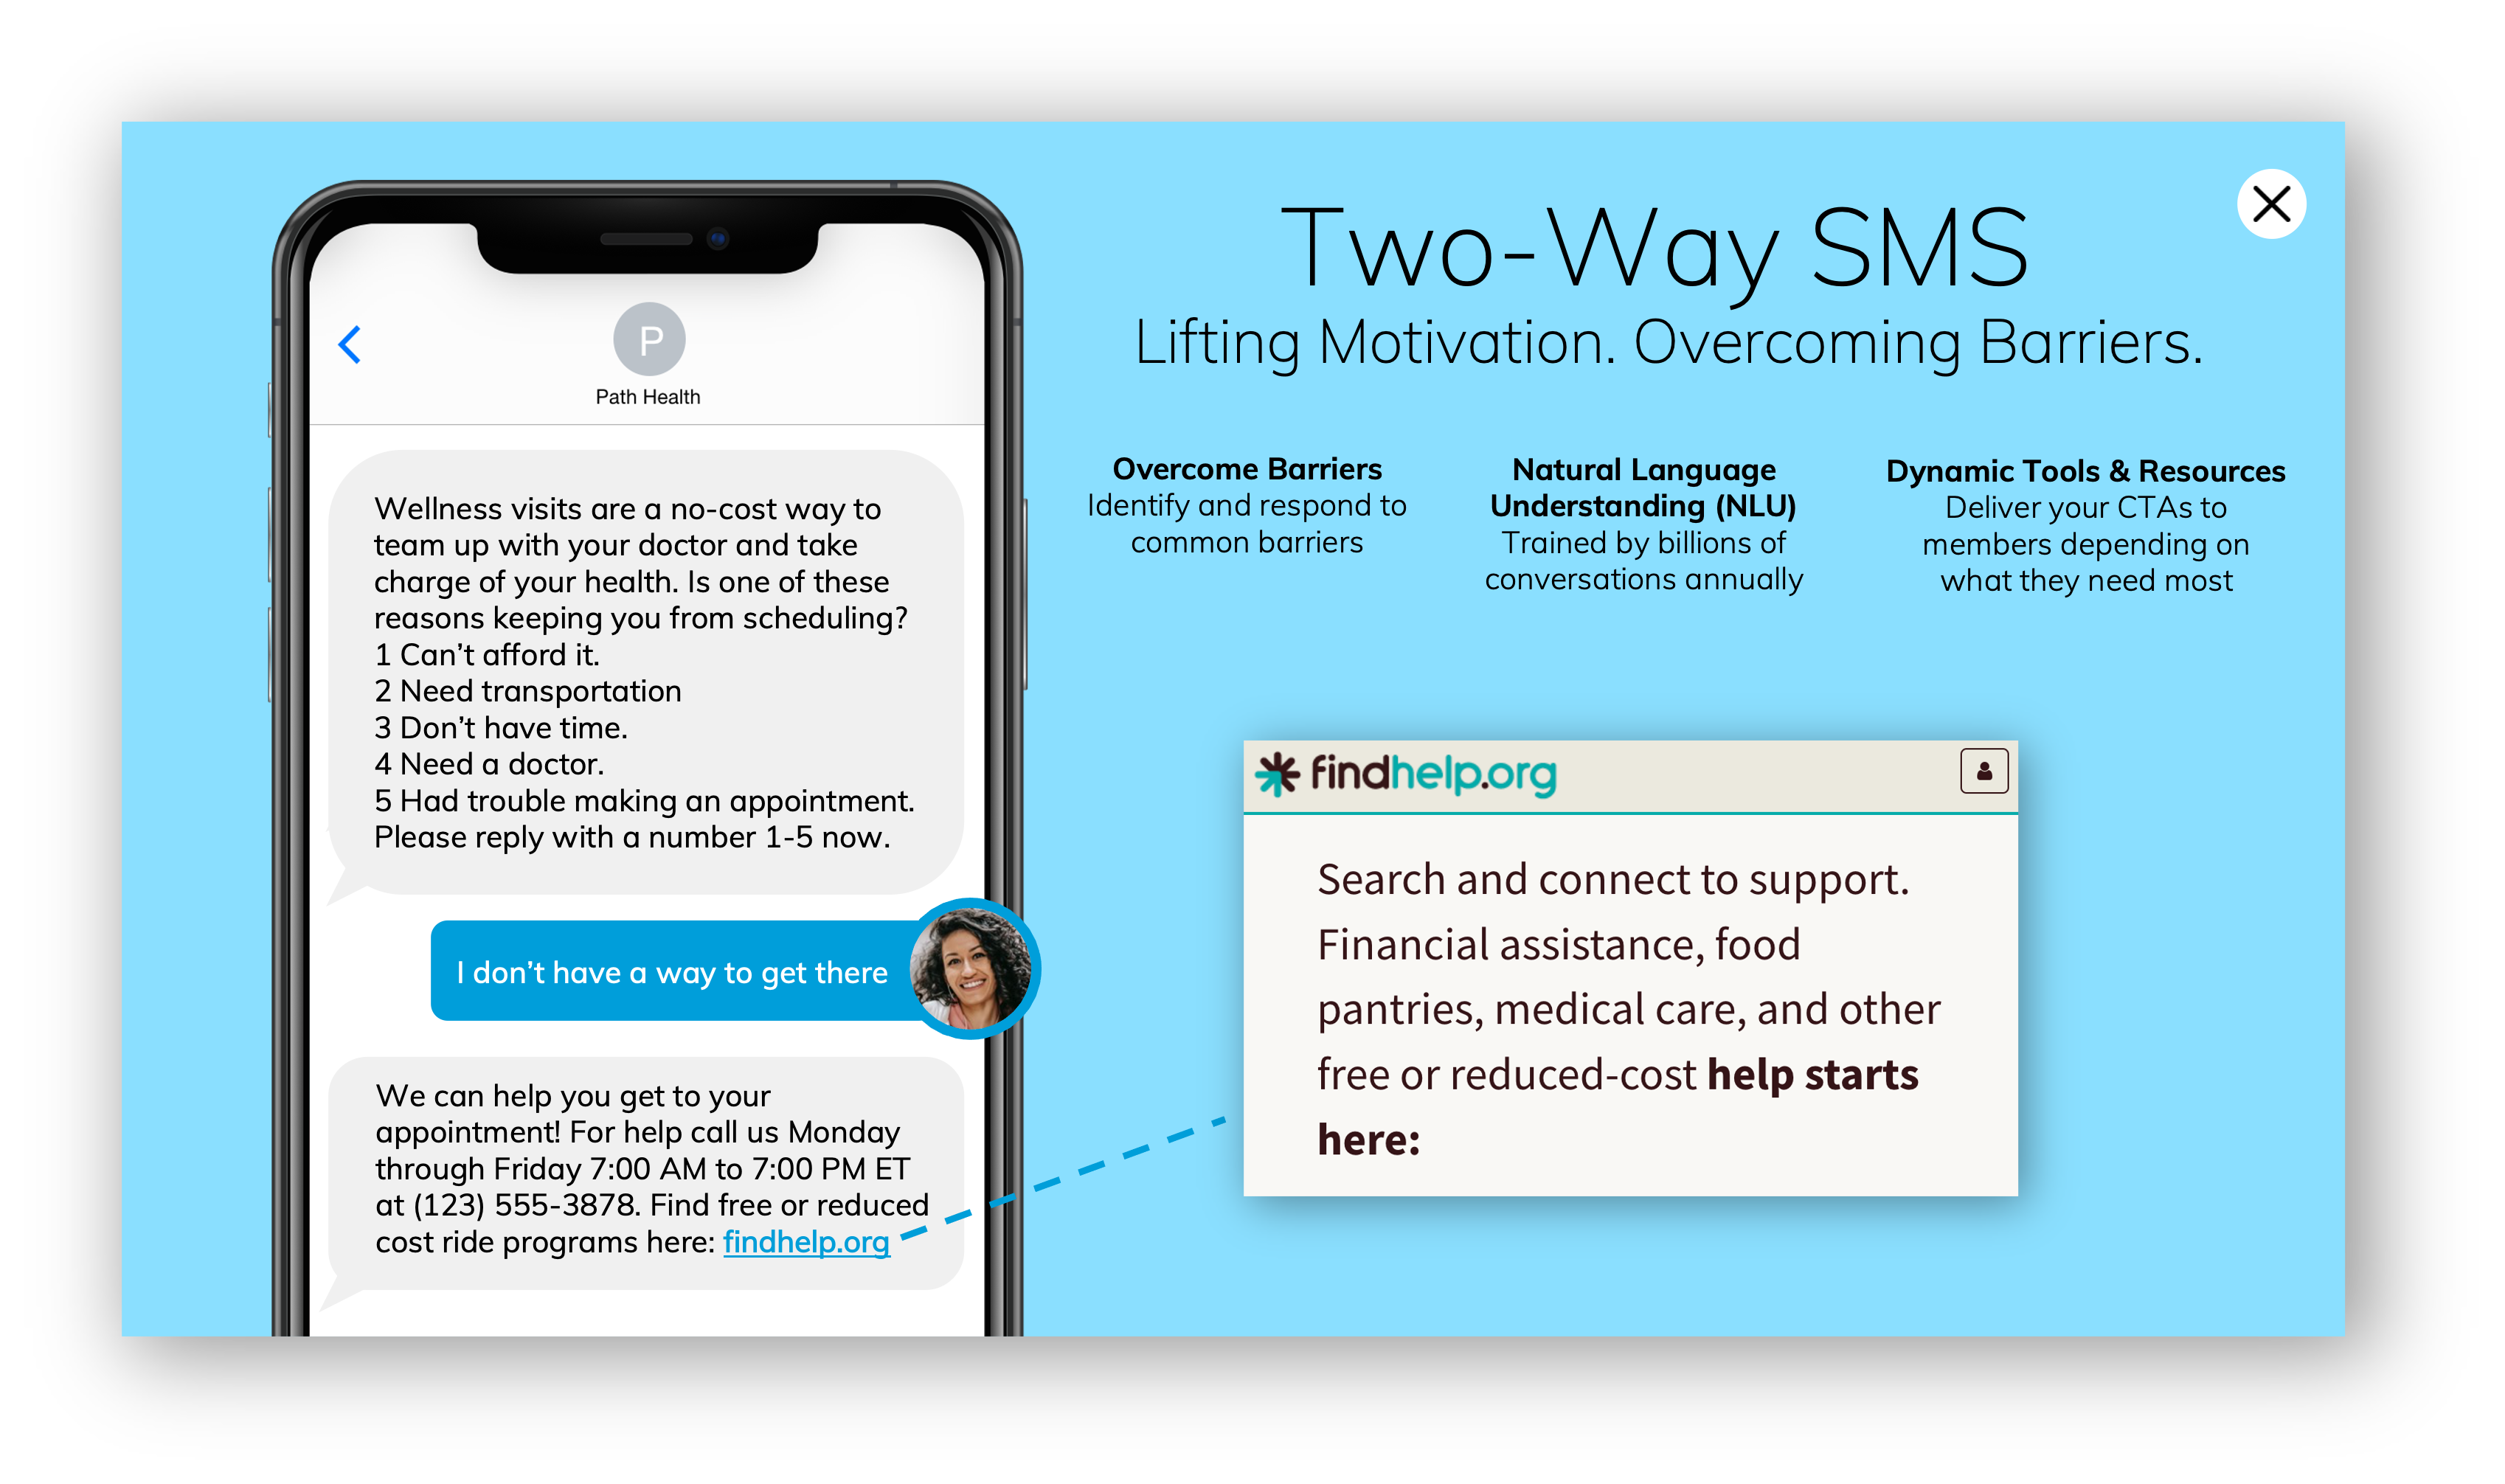 mPulse's two-way SMS technology identifies barriers and effortlessly guides patients to schedule their Annual Wellness Visit